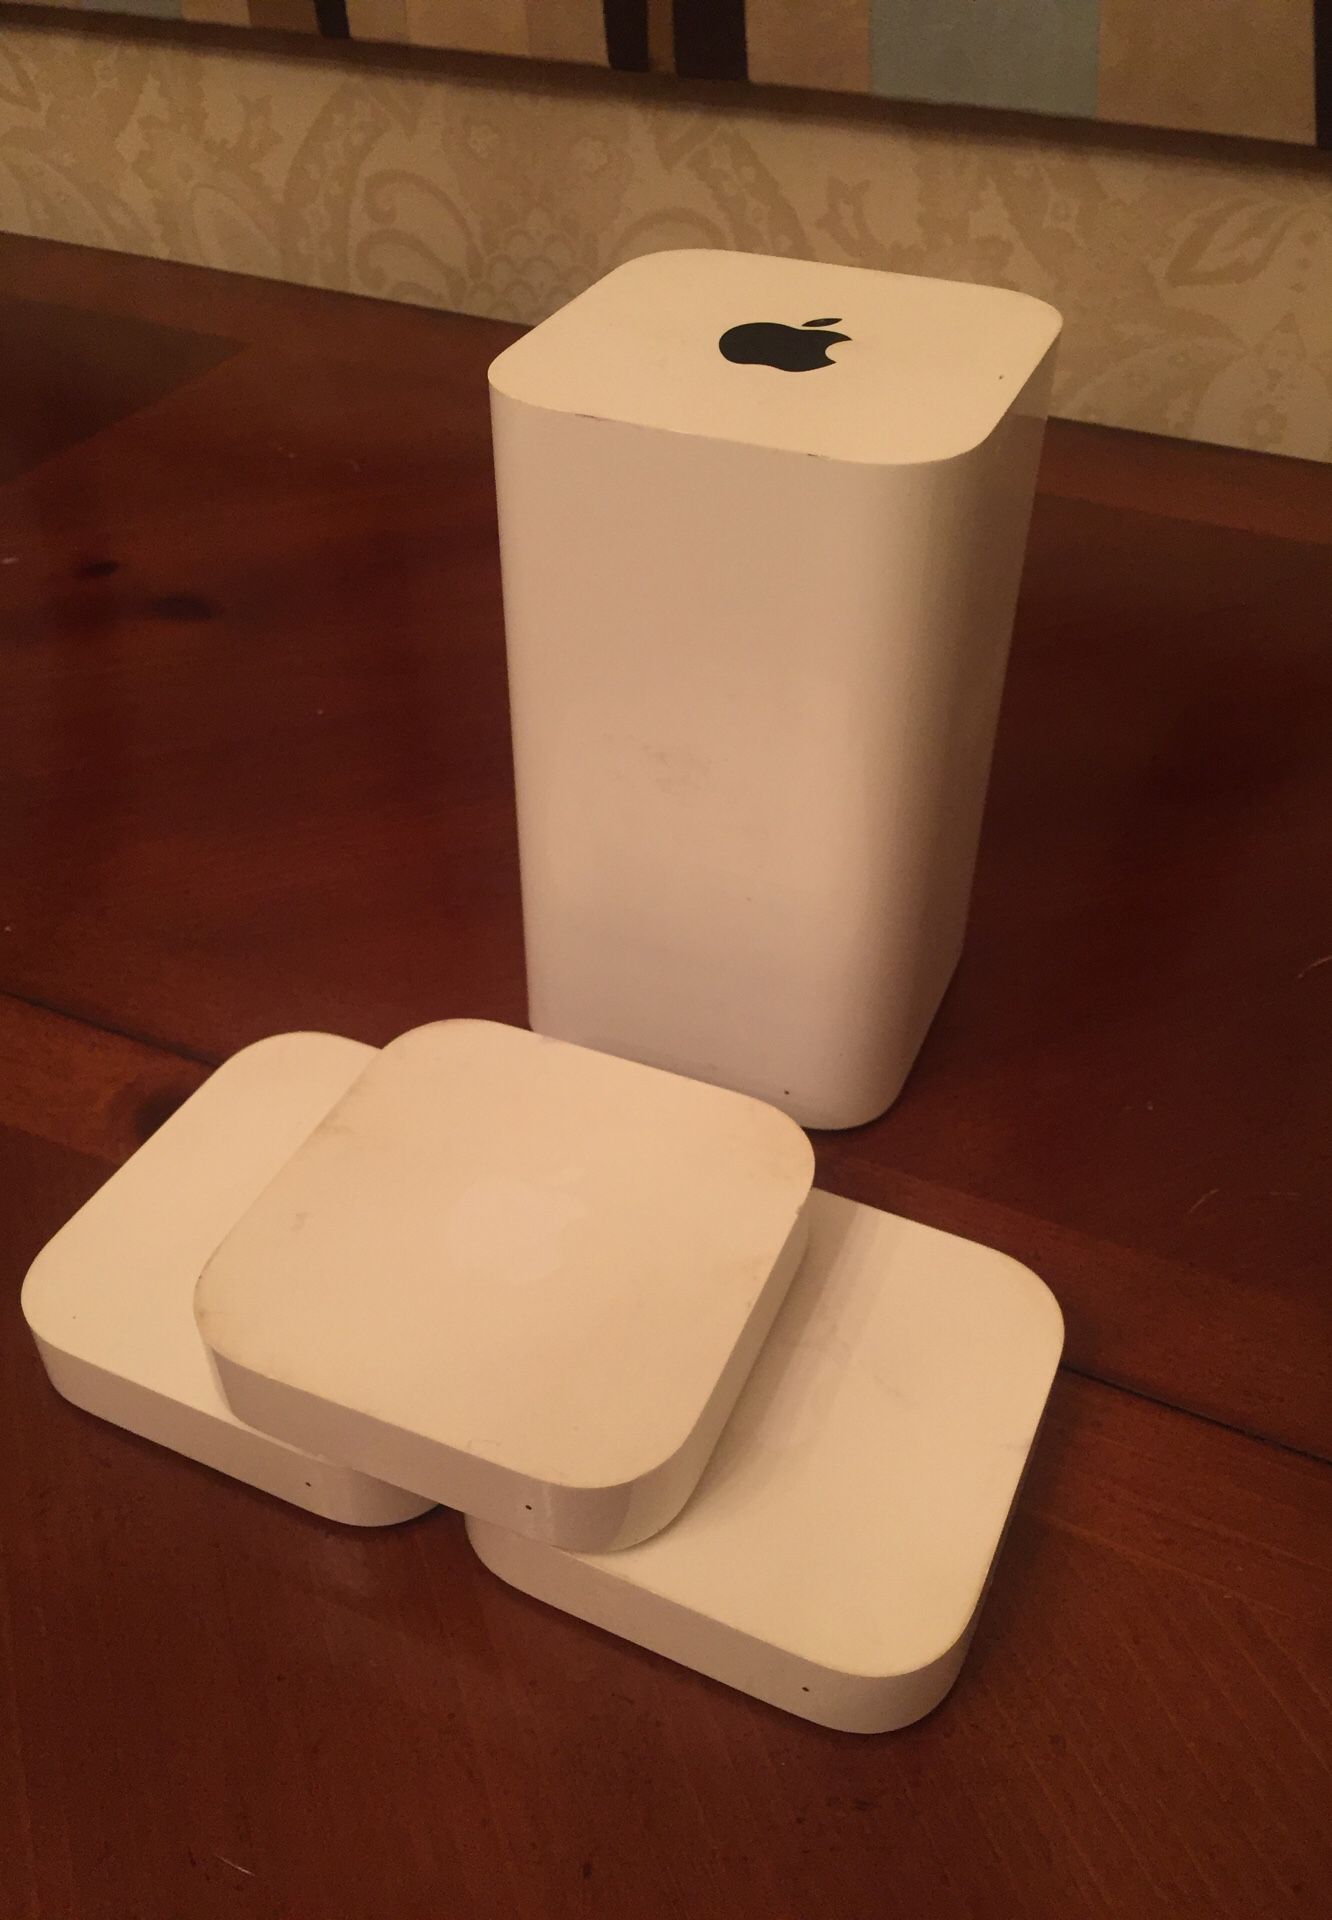 Apple Network - AirPort Extreme Base Station + (3) Airport Express